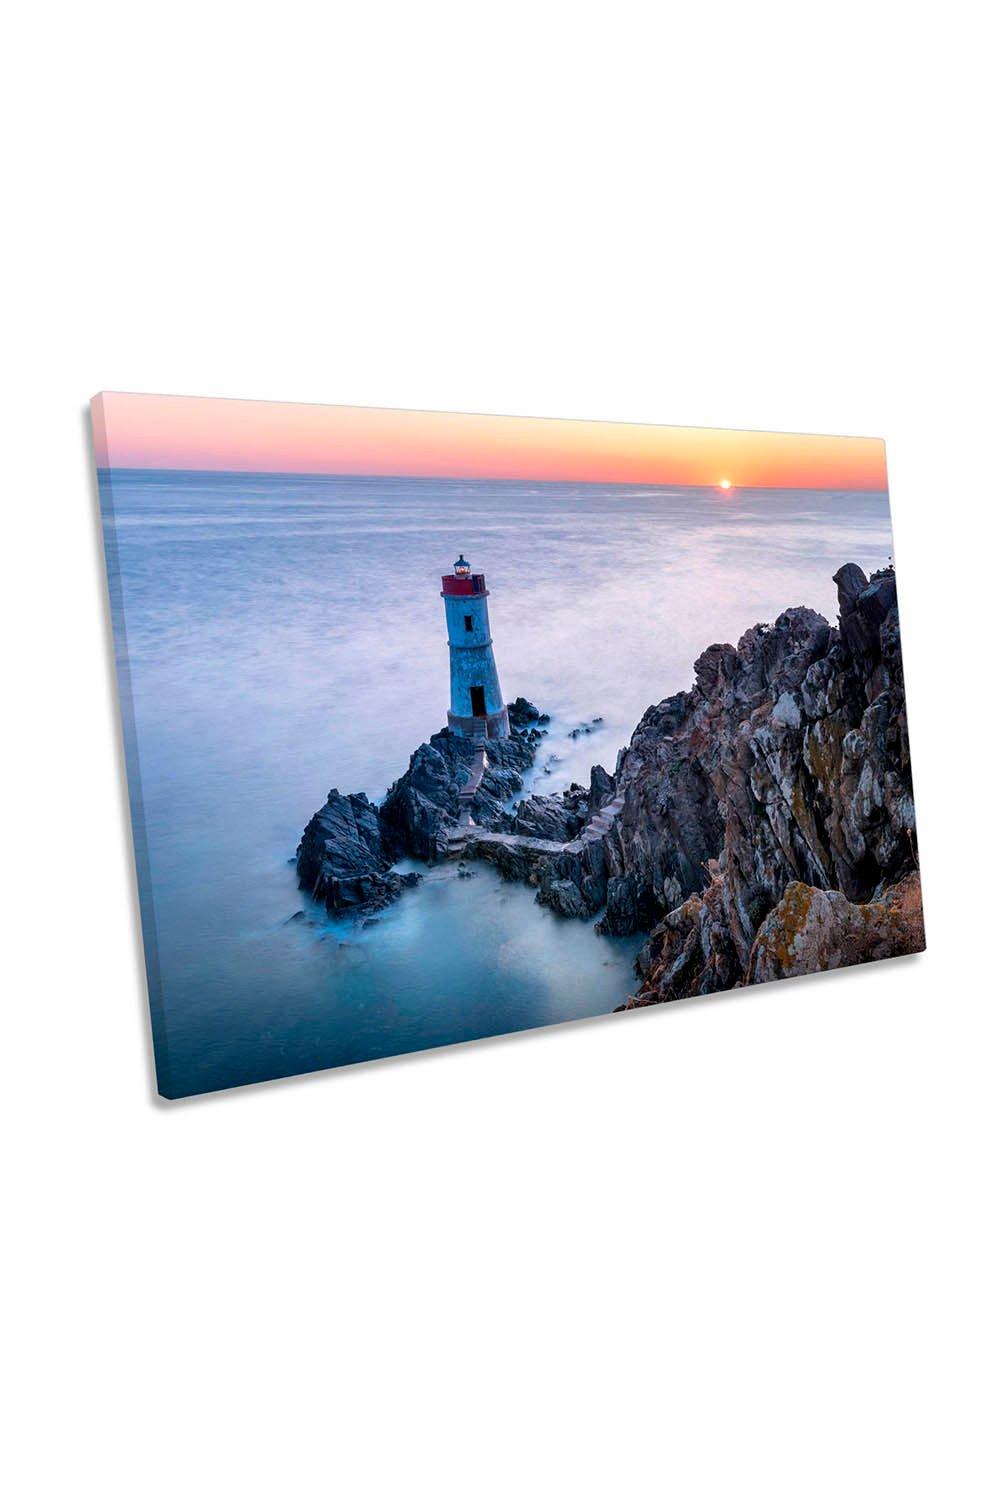 Two Lights Sunset Lighthouse Sadinia Italy Canvas Wall Art Picture Print